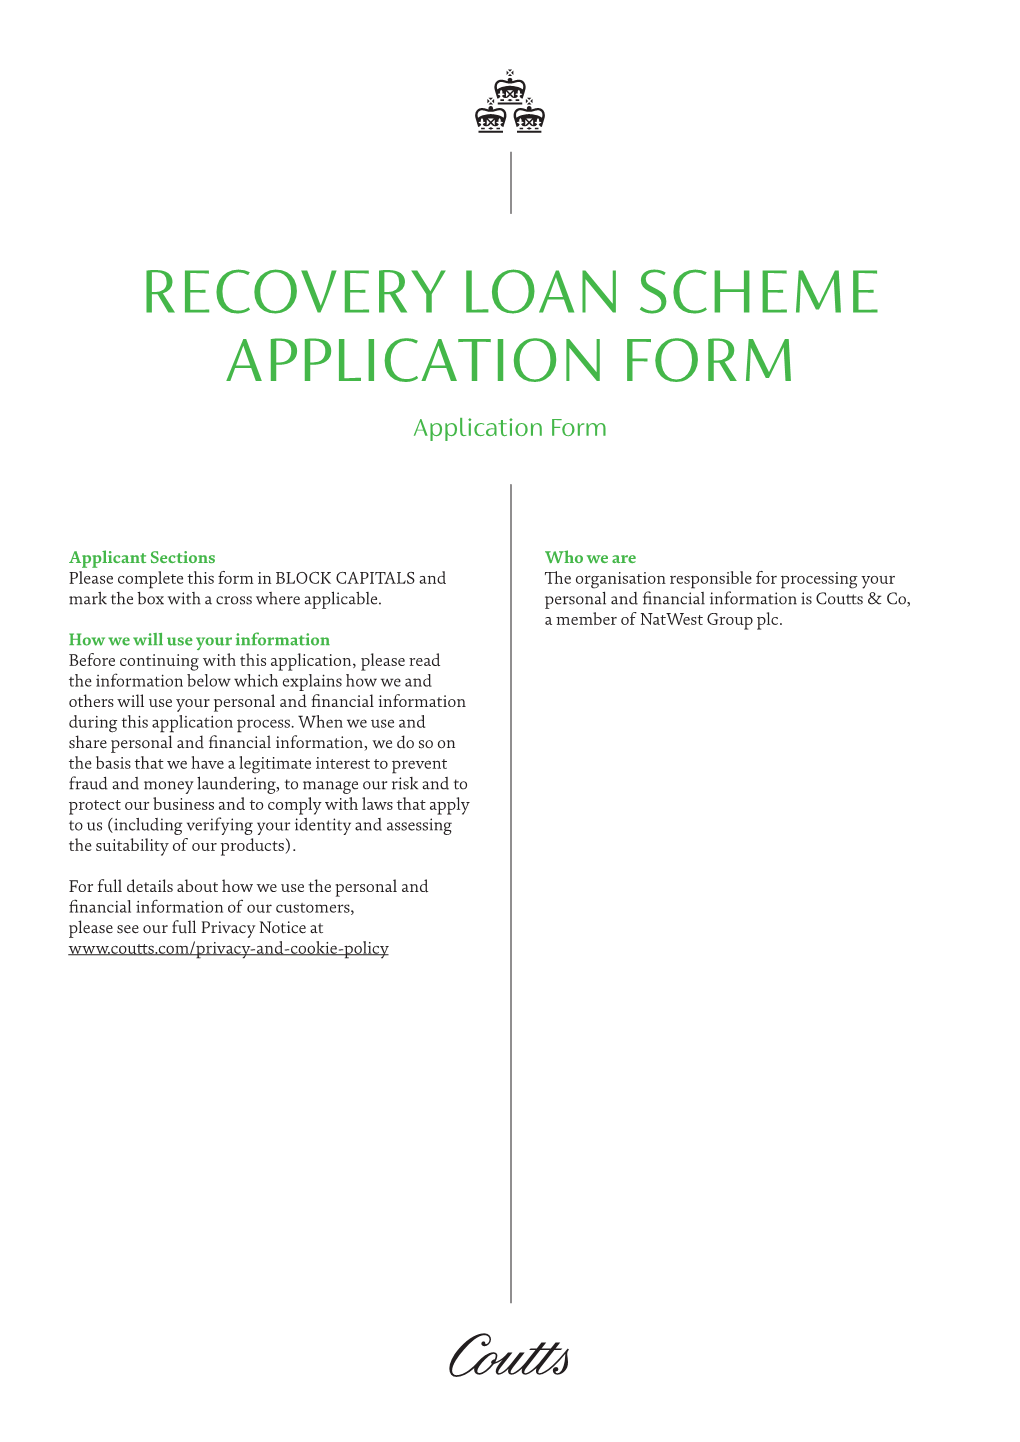 RECOVERY LOAN SCHEME APPLICATION FORM Application Form